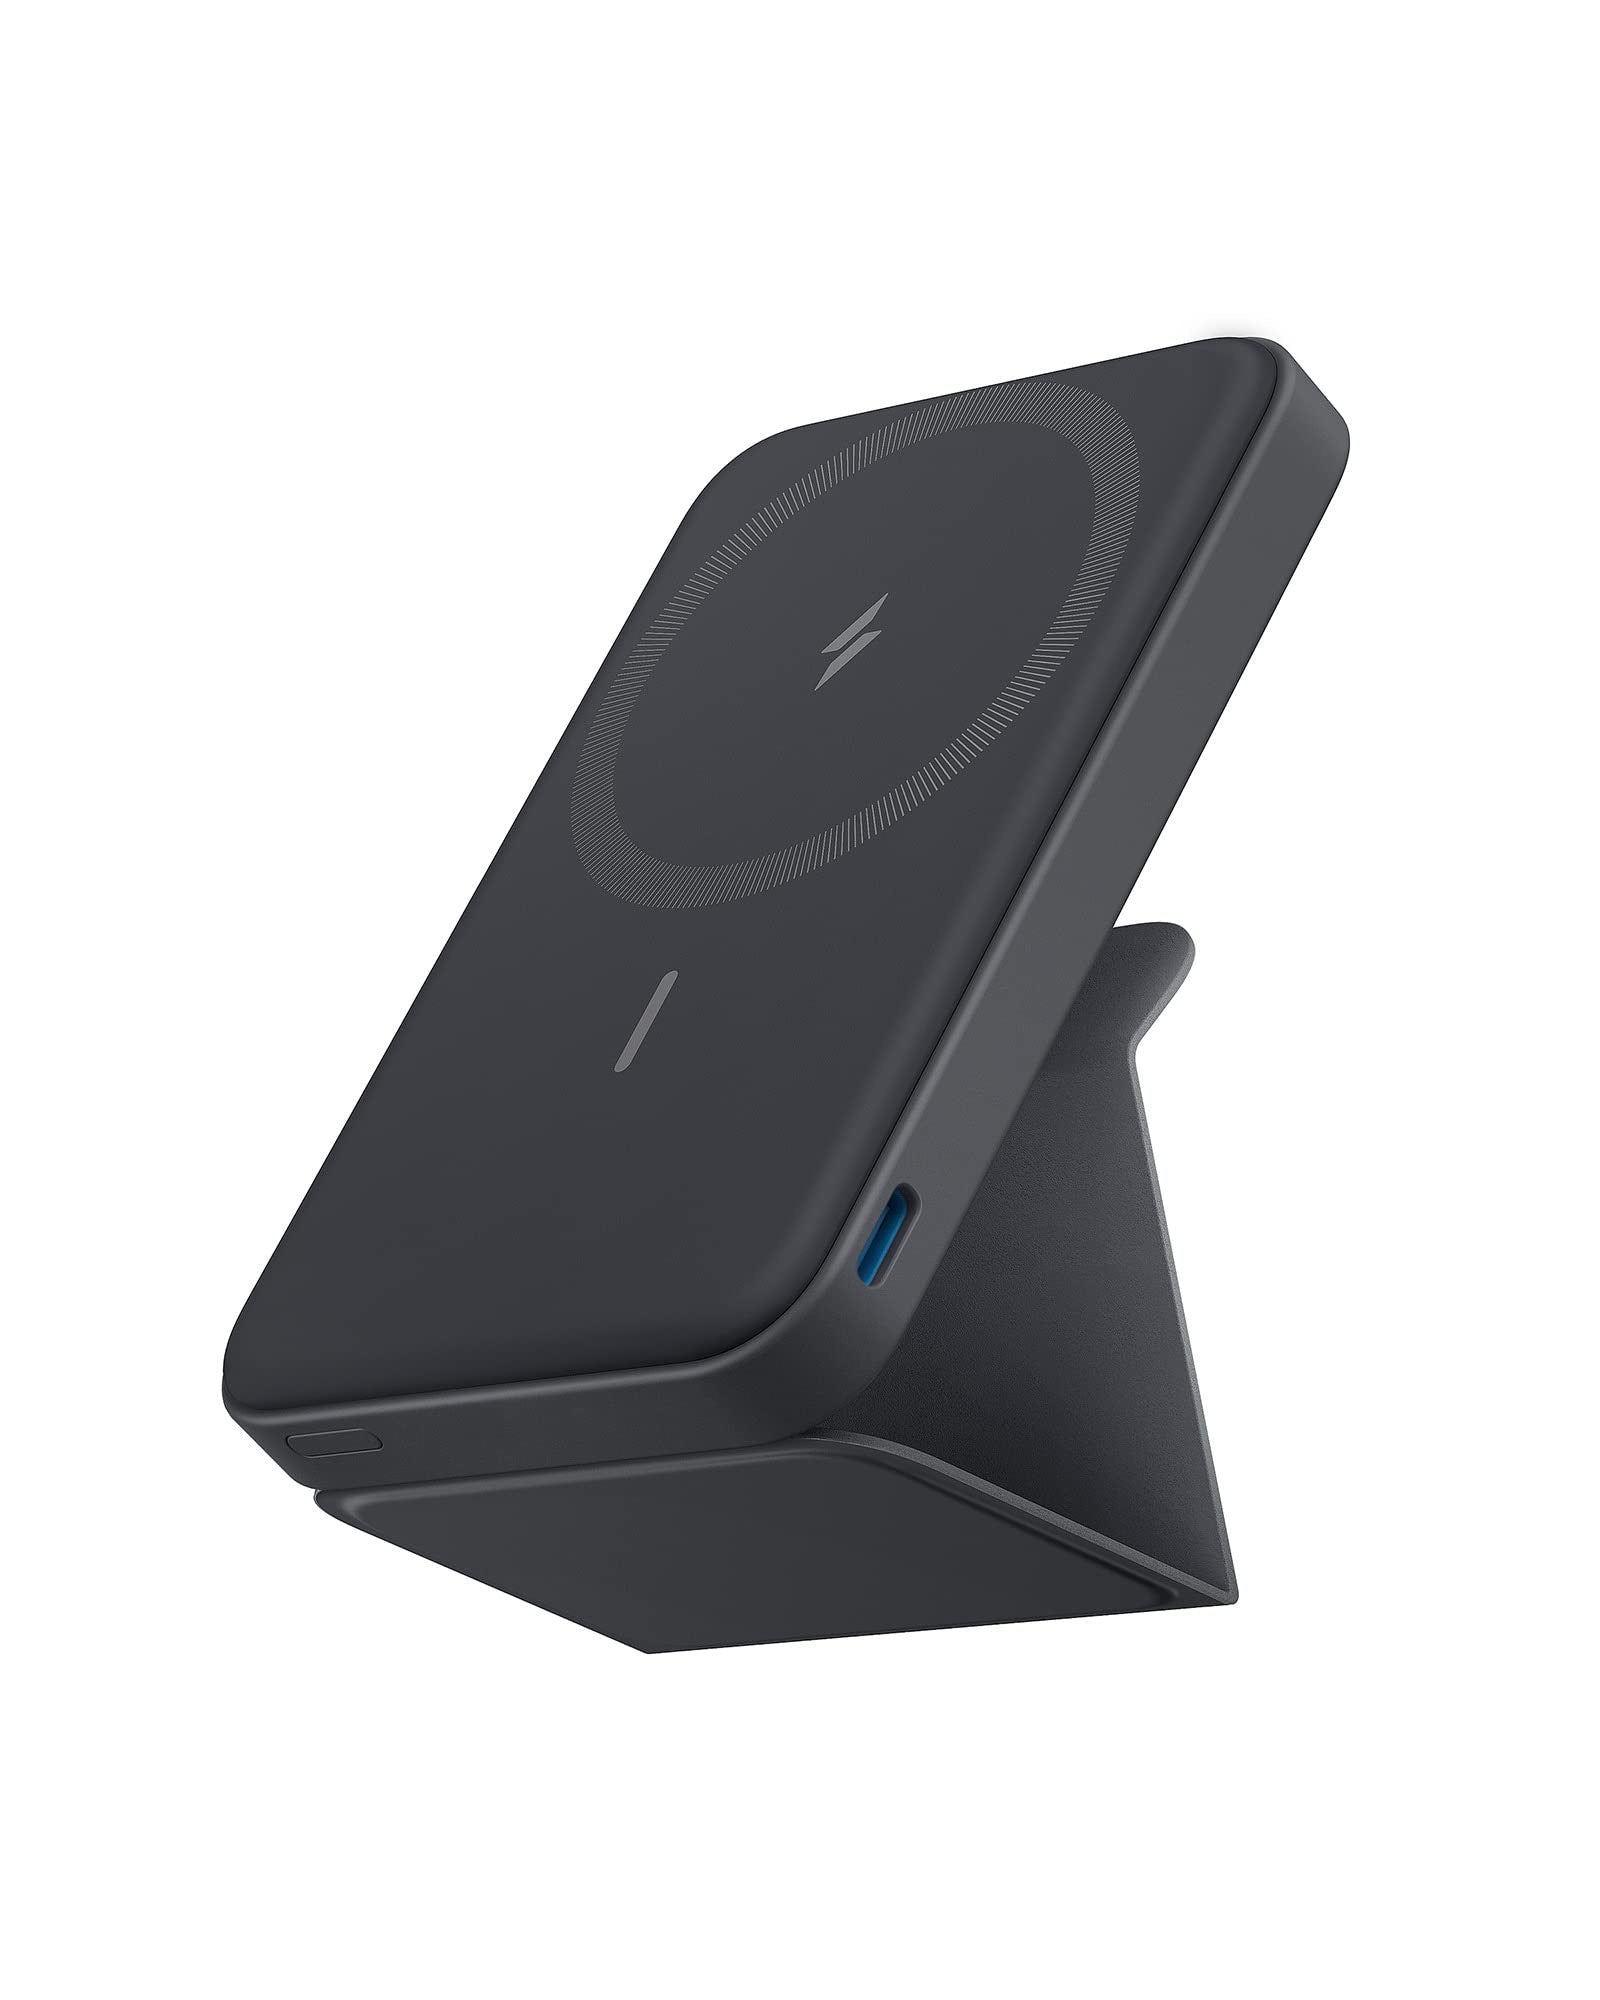 Anker MagGo power bank 5000mah magnetic and slim with foldable stand